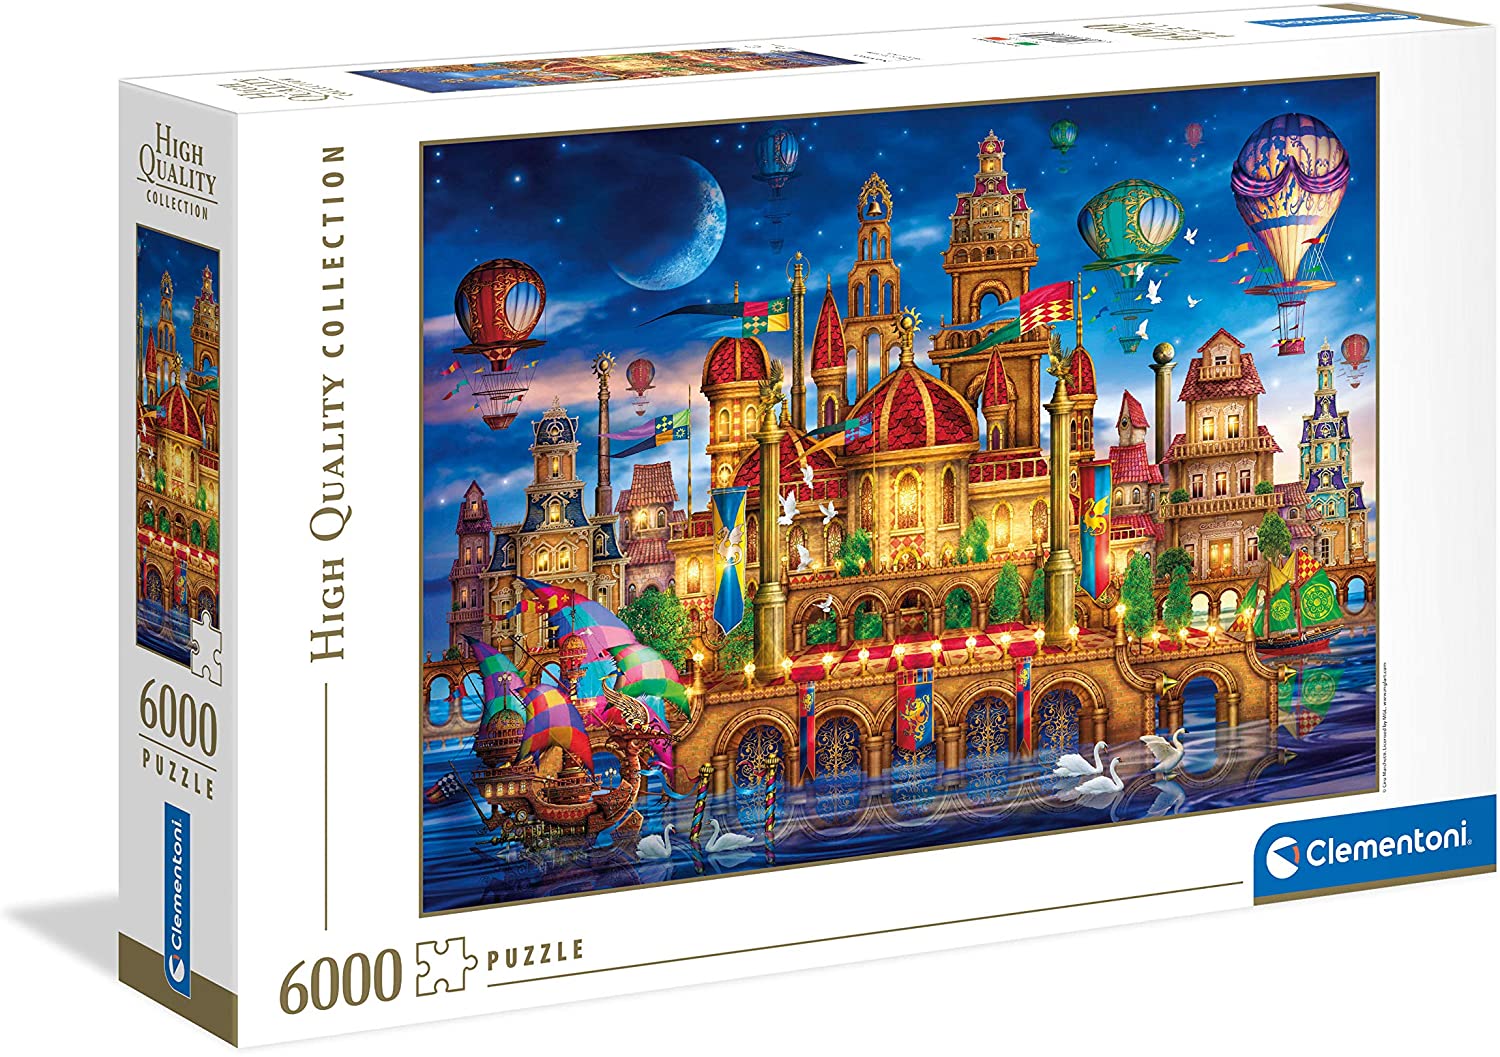 CLEMENTONI - BOARD GAME - 6000 PCS - HIGH QUALITY COLLECTION - PUZZLE - MOD: CLM36529